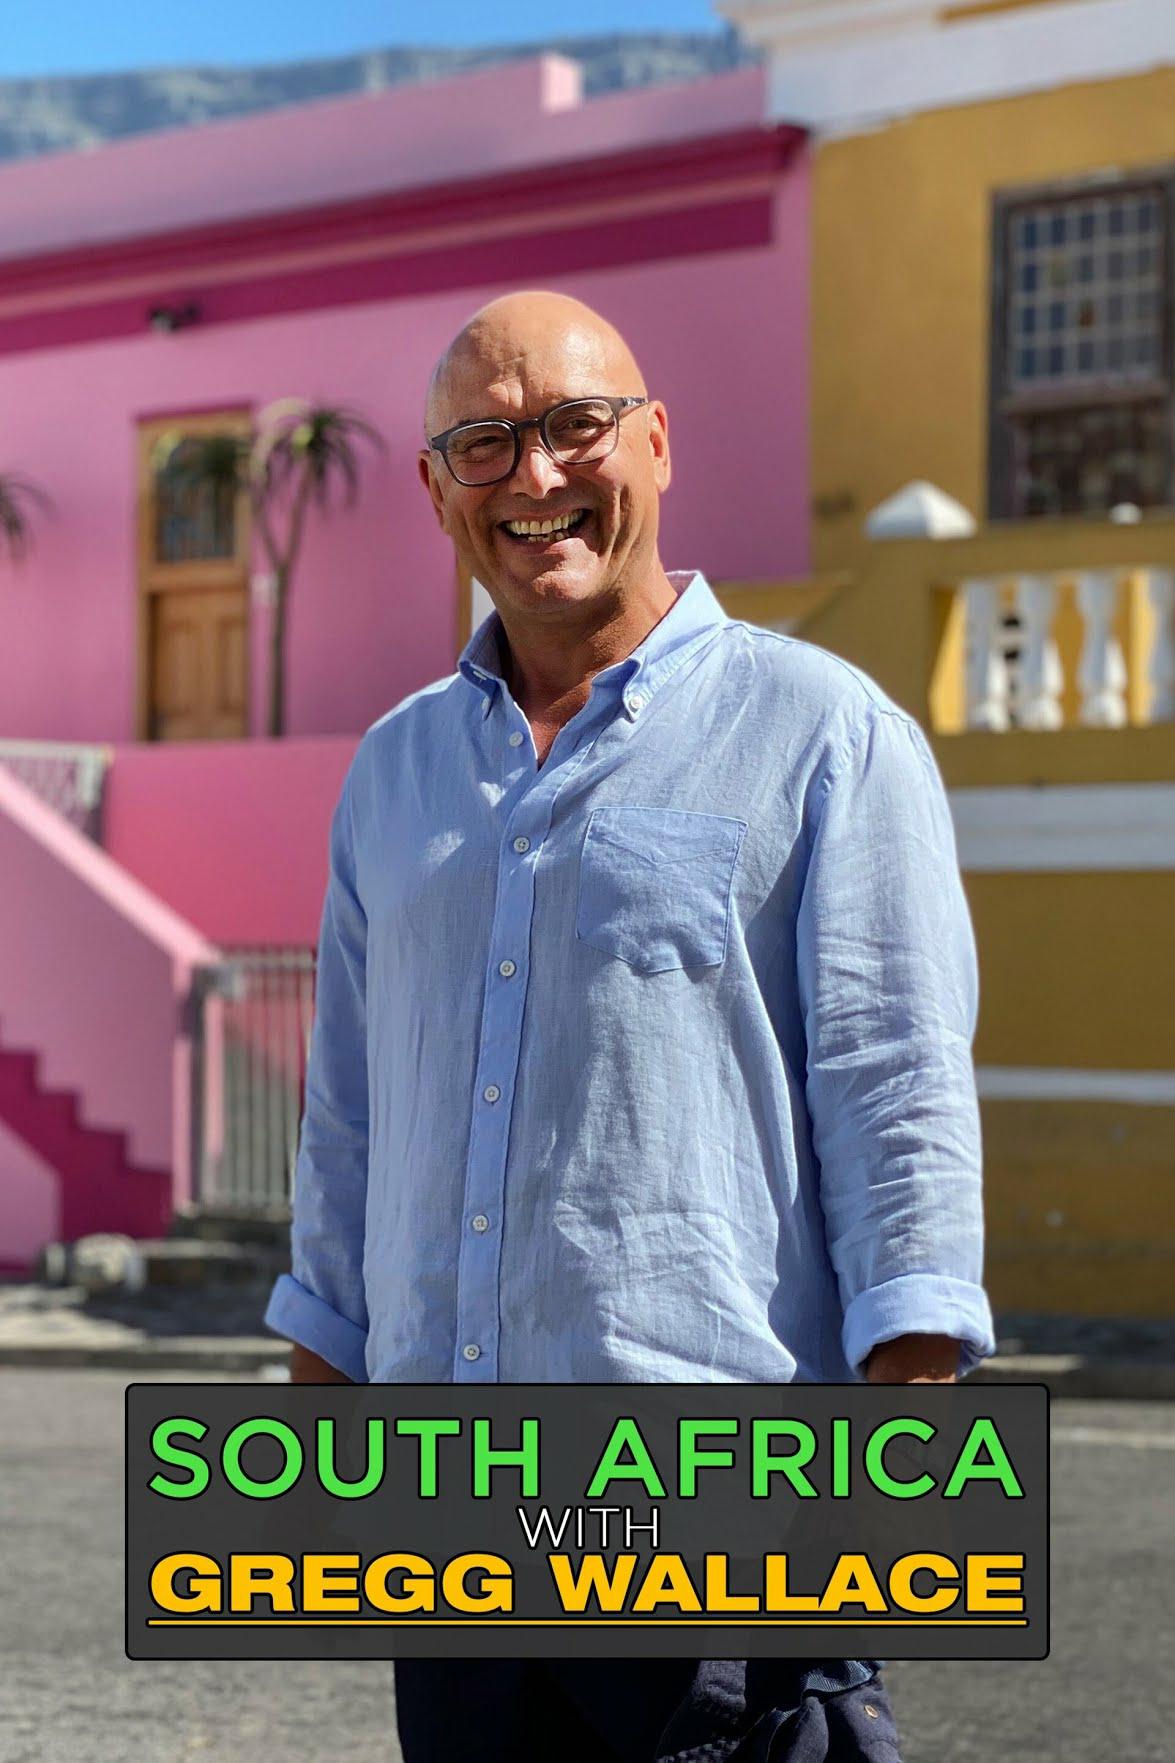 TV ratings for South Africa With Gregg Wallace in Argentina. ITV TV series